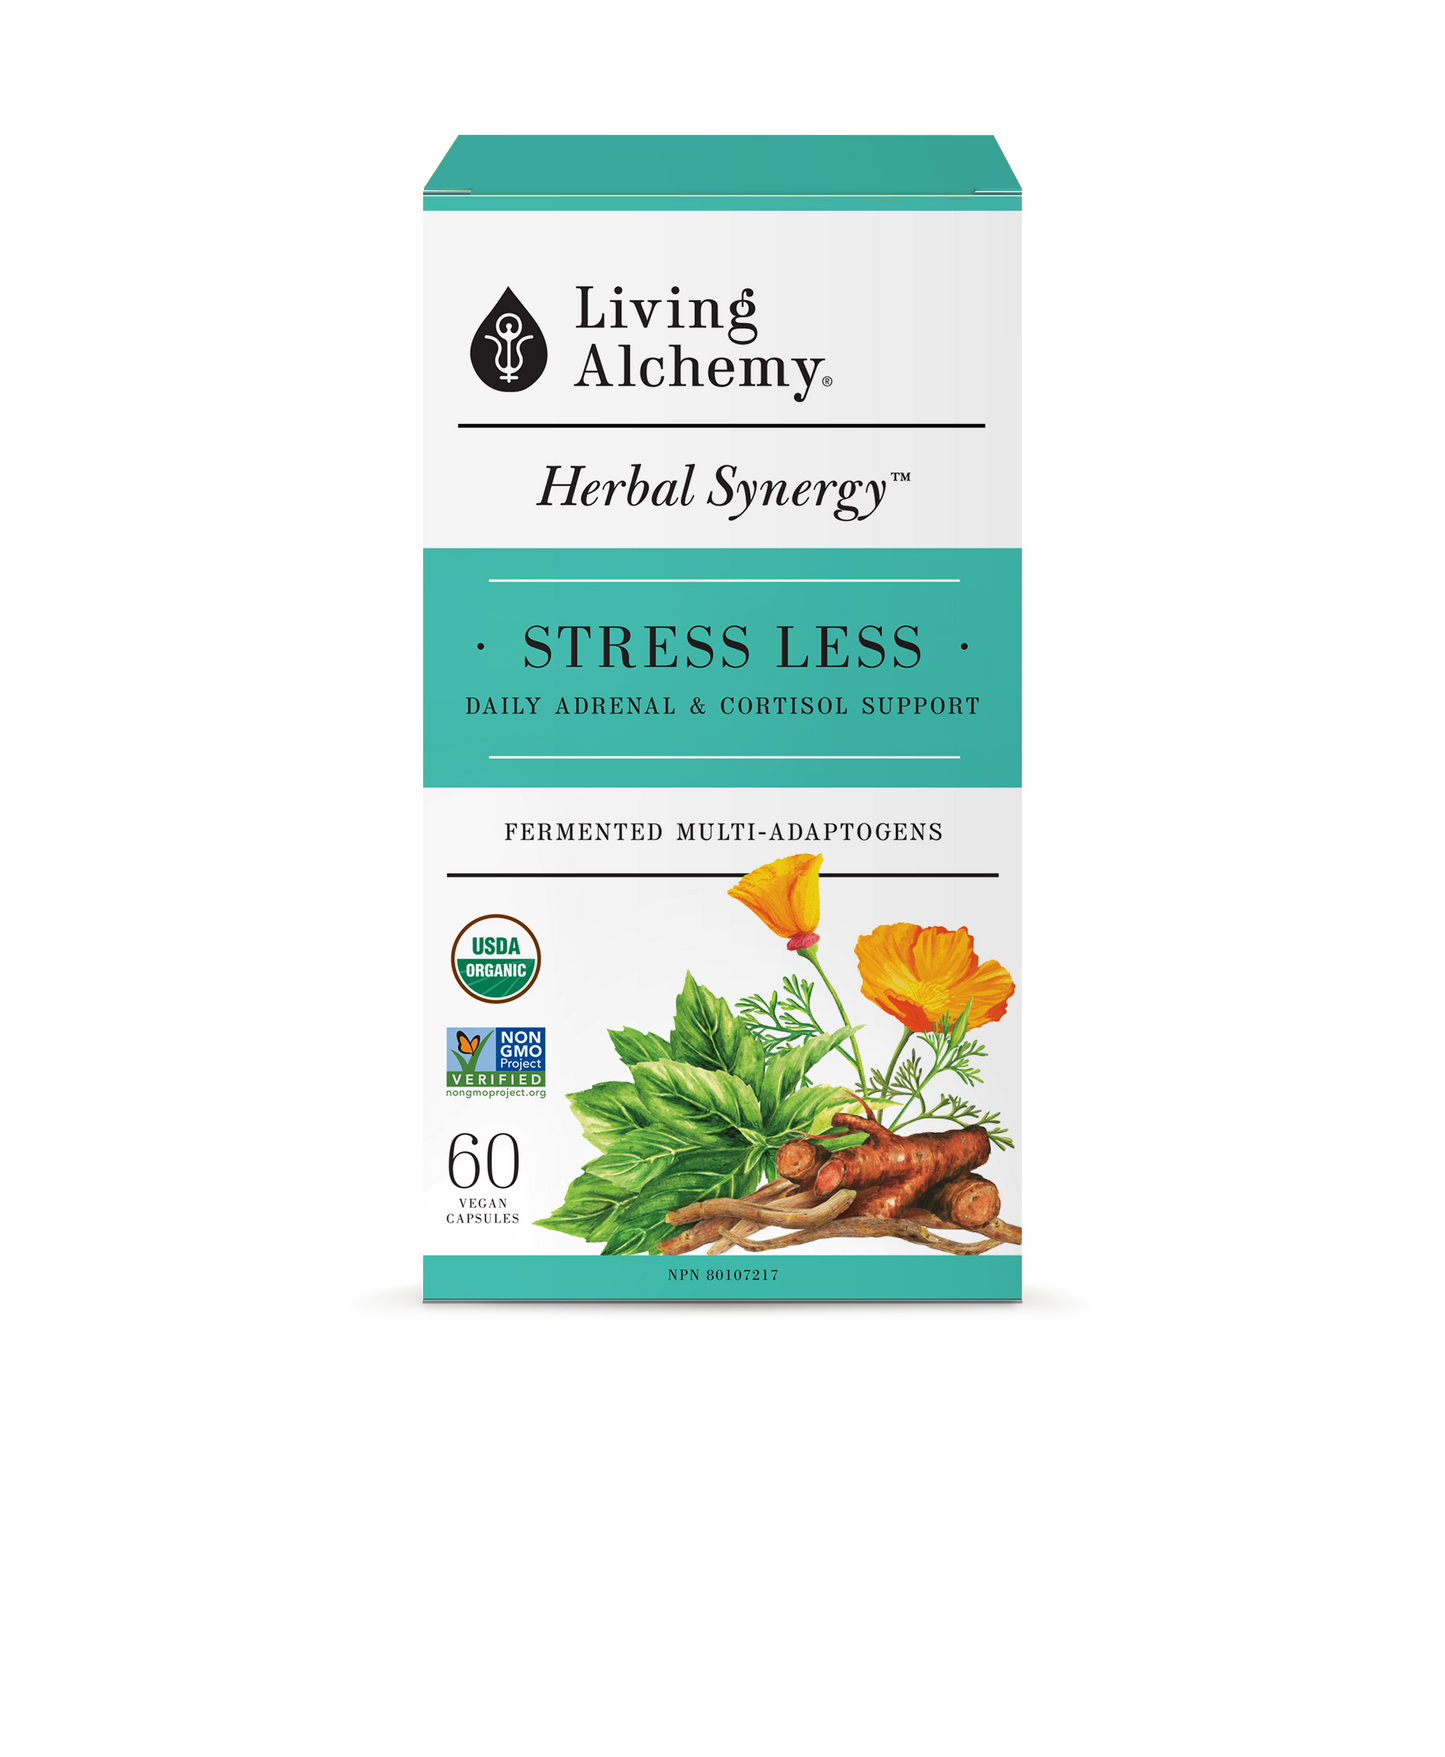 Your Flora: STRESS LESS by Living Alchemy